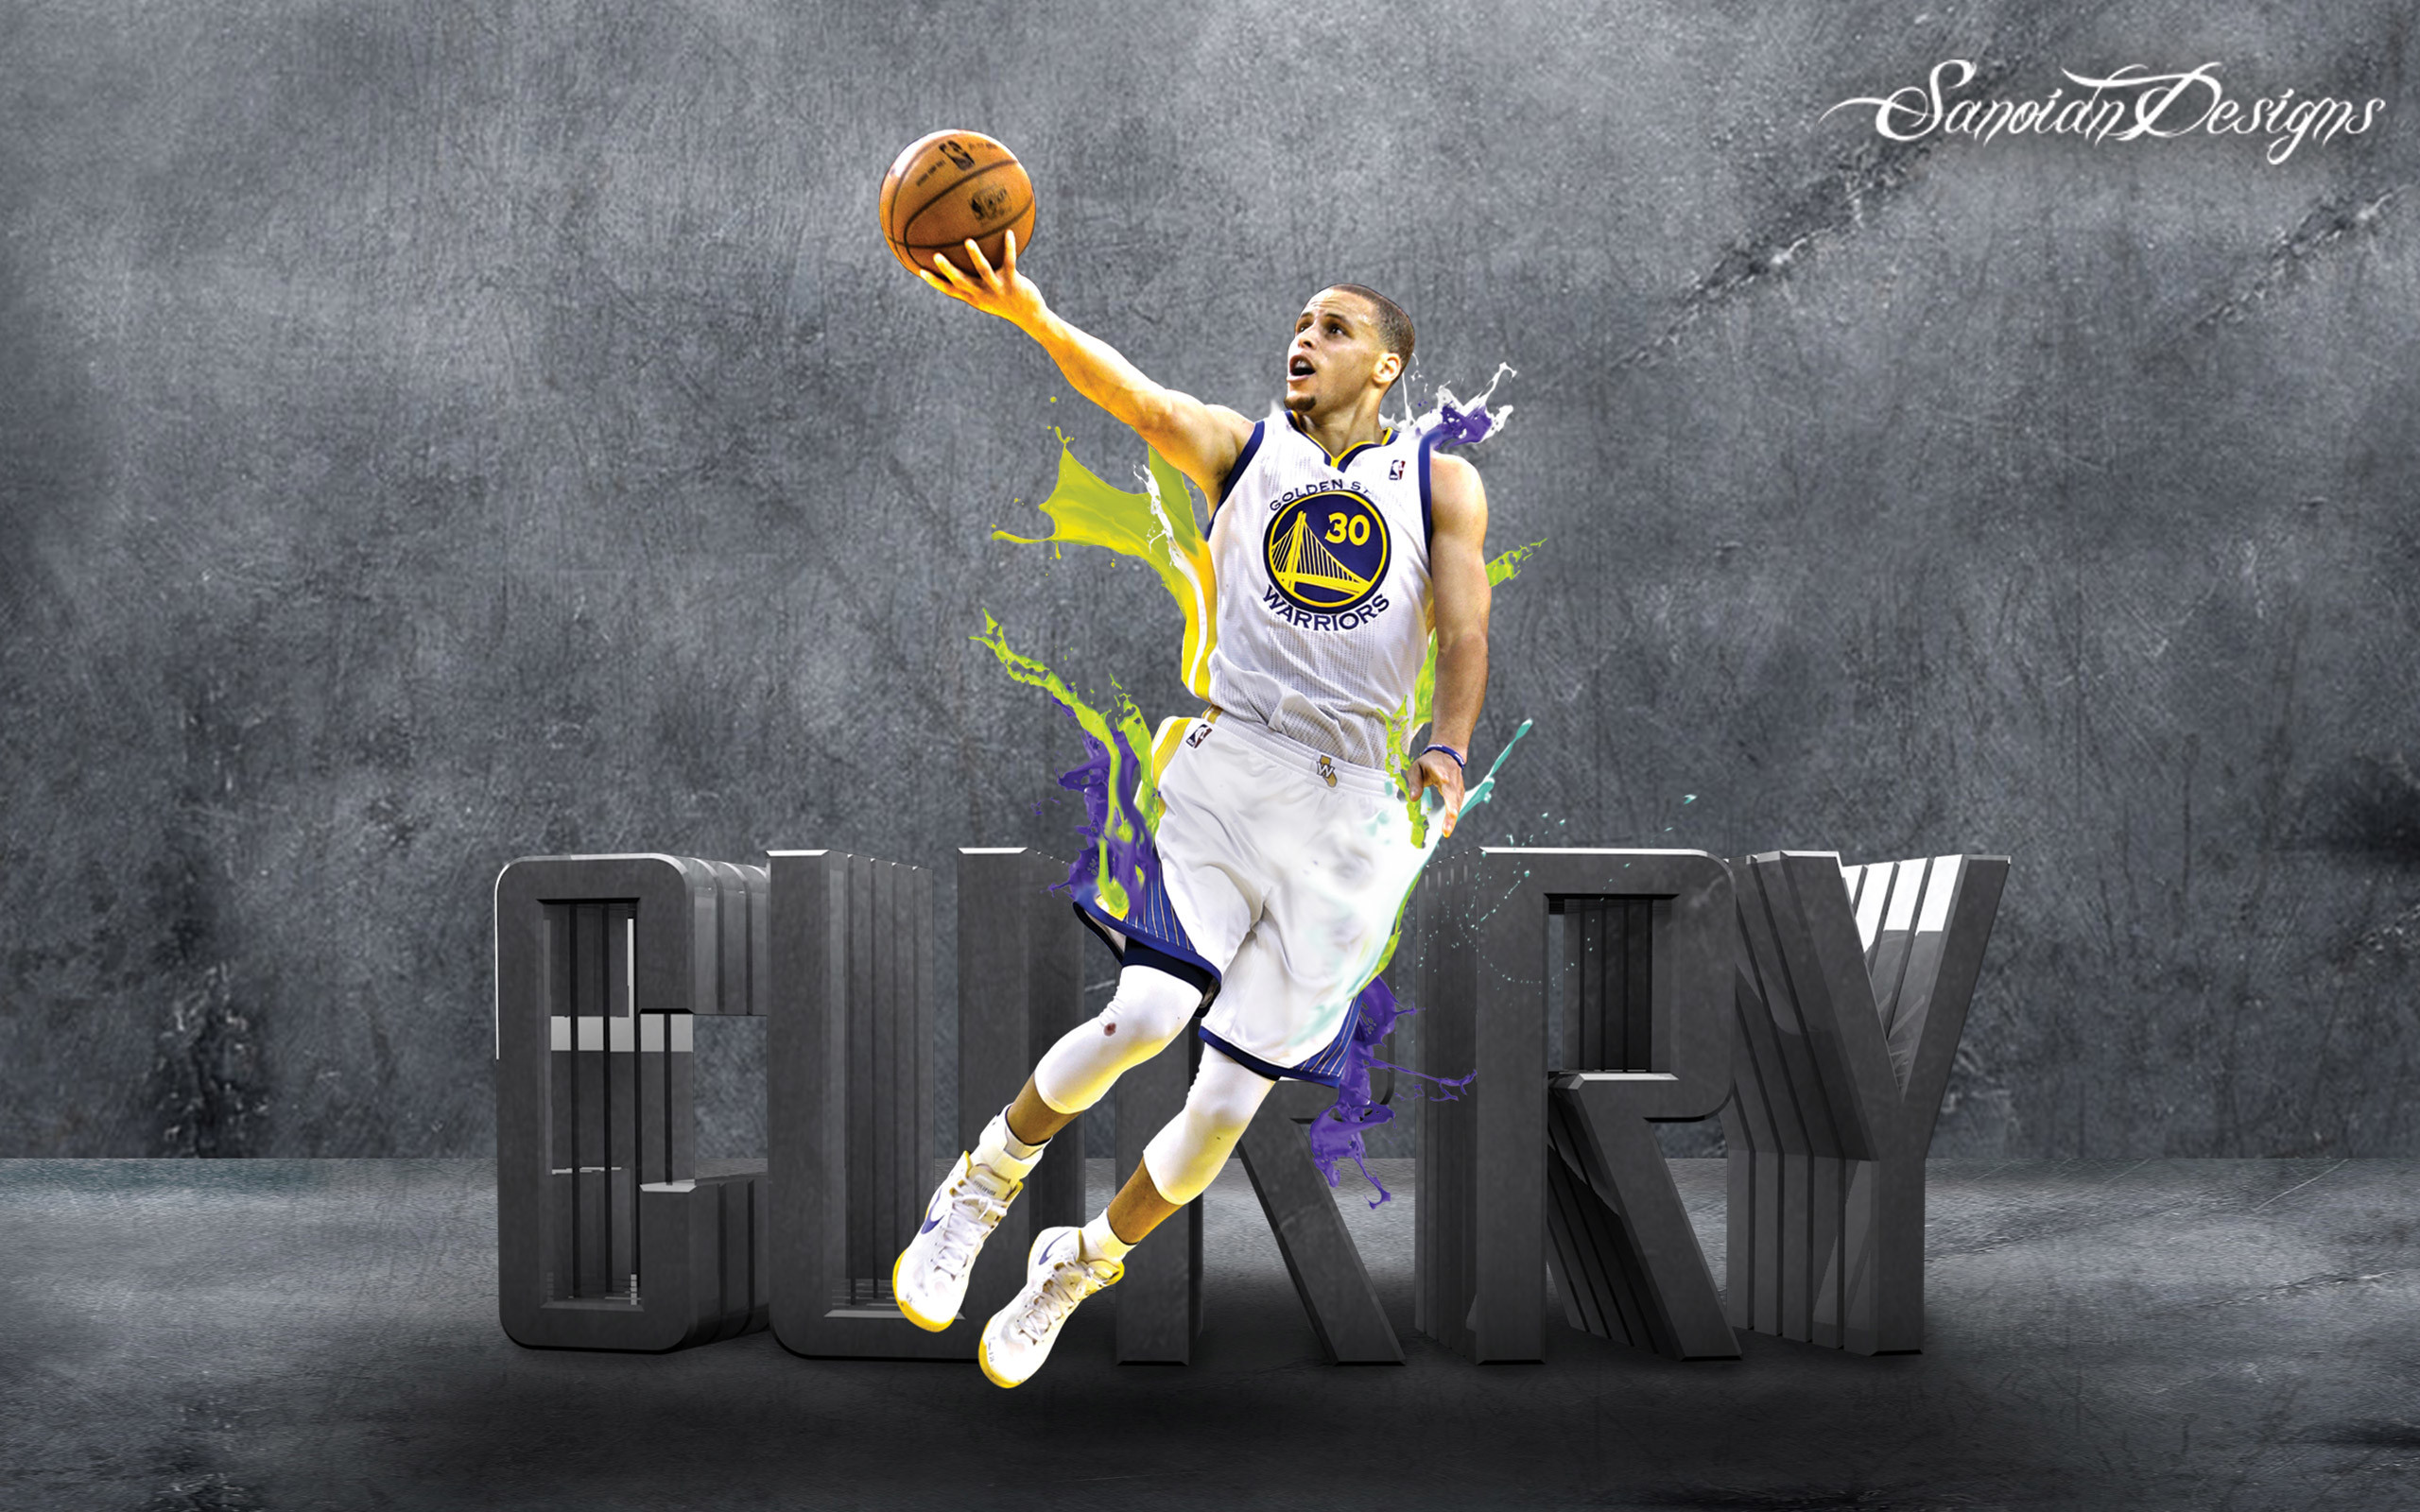 2560x1600 Stephen Curry wallpaper 2014 Download - Stephen Curry wallpaper .